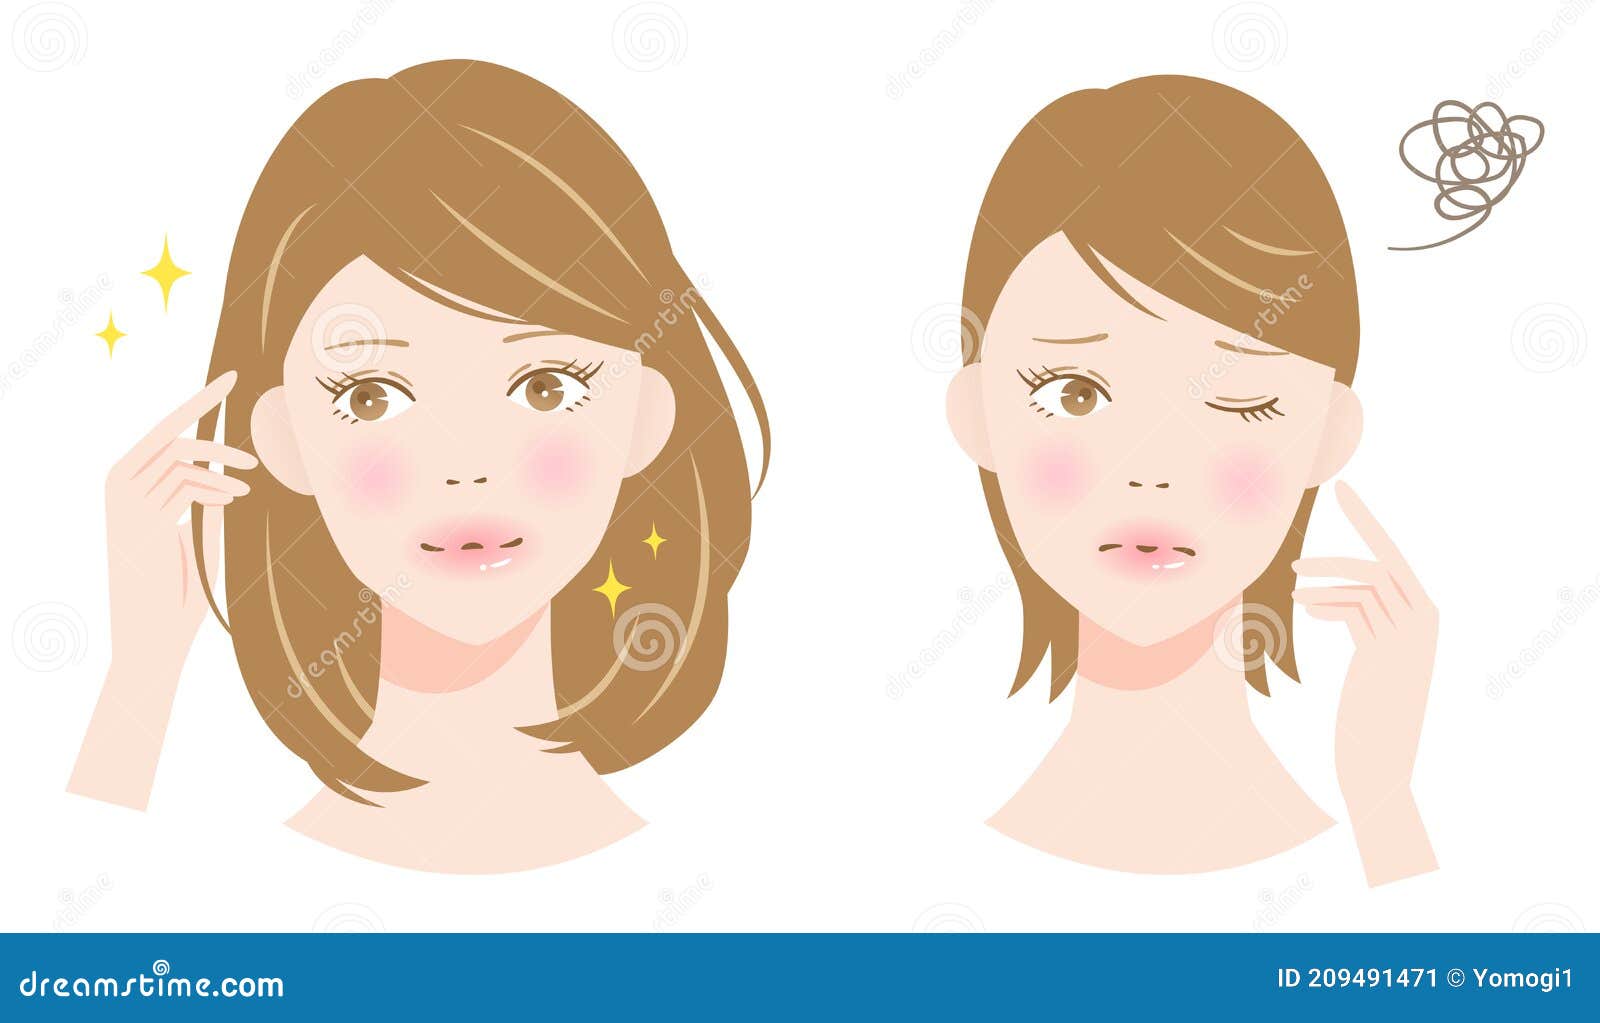 Voluming and Thin Hair Woman Illustration. Hair Care and Beauty Concept  Stock Vector - Illustration of smooth, loss: 209491471